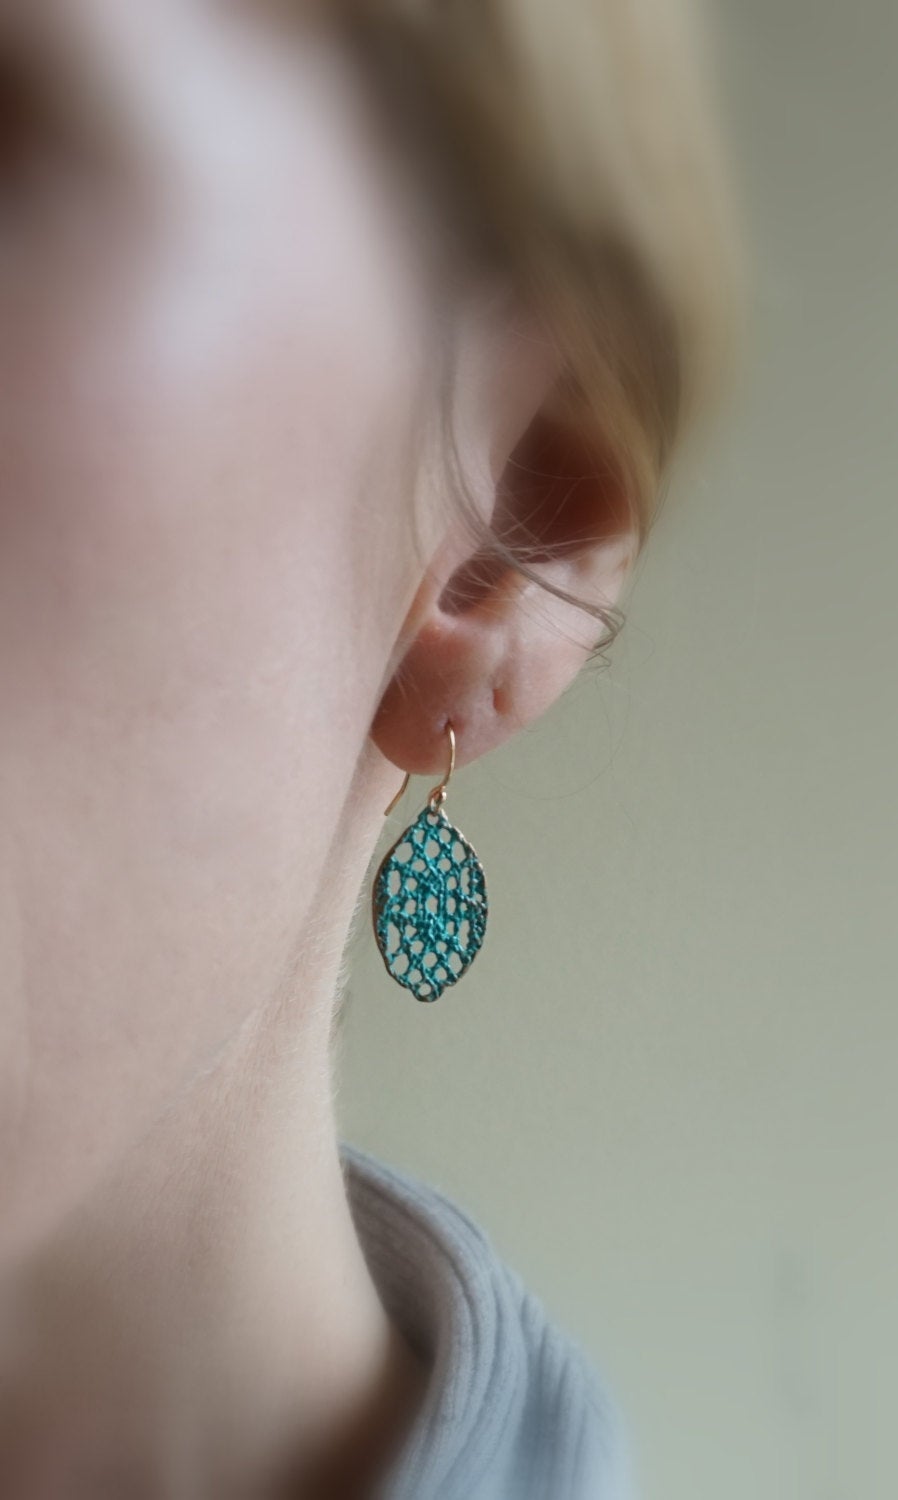 Lace drop earrings in verdigris blue patina with 14k gold filled hooks